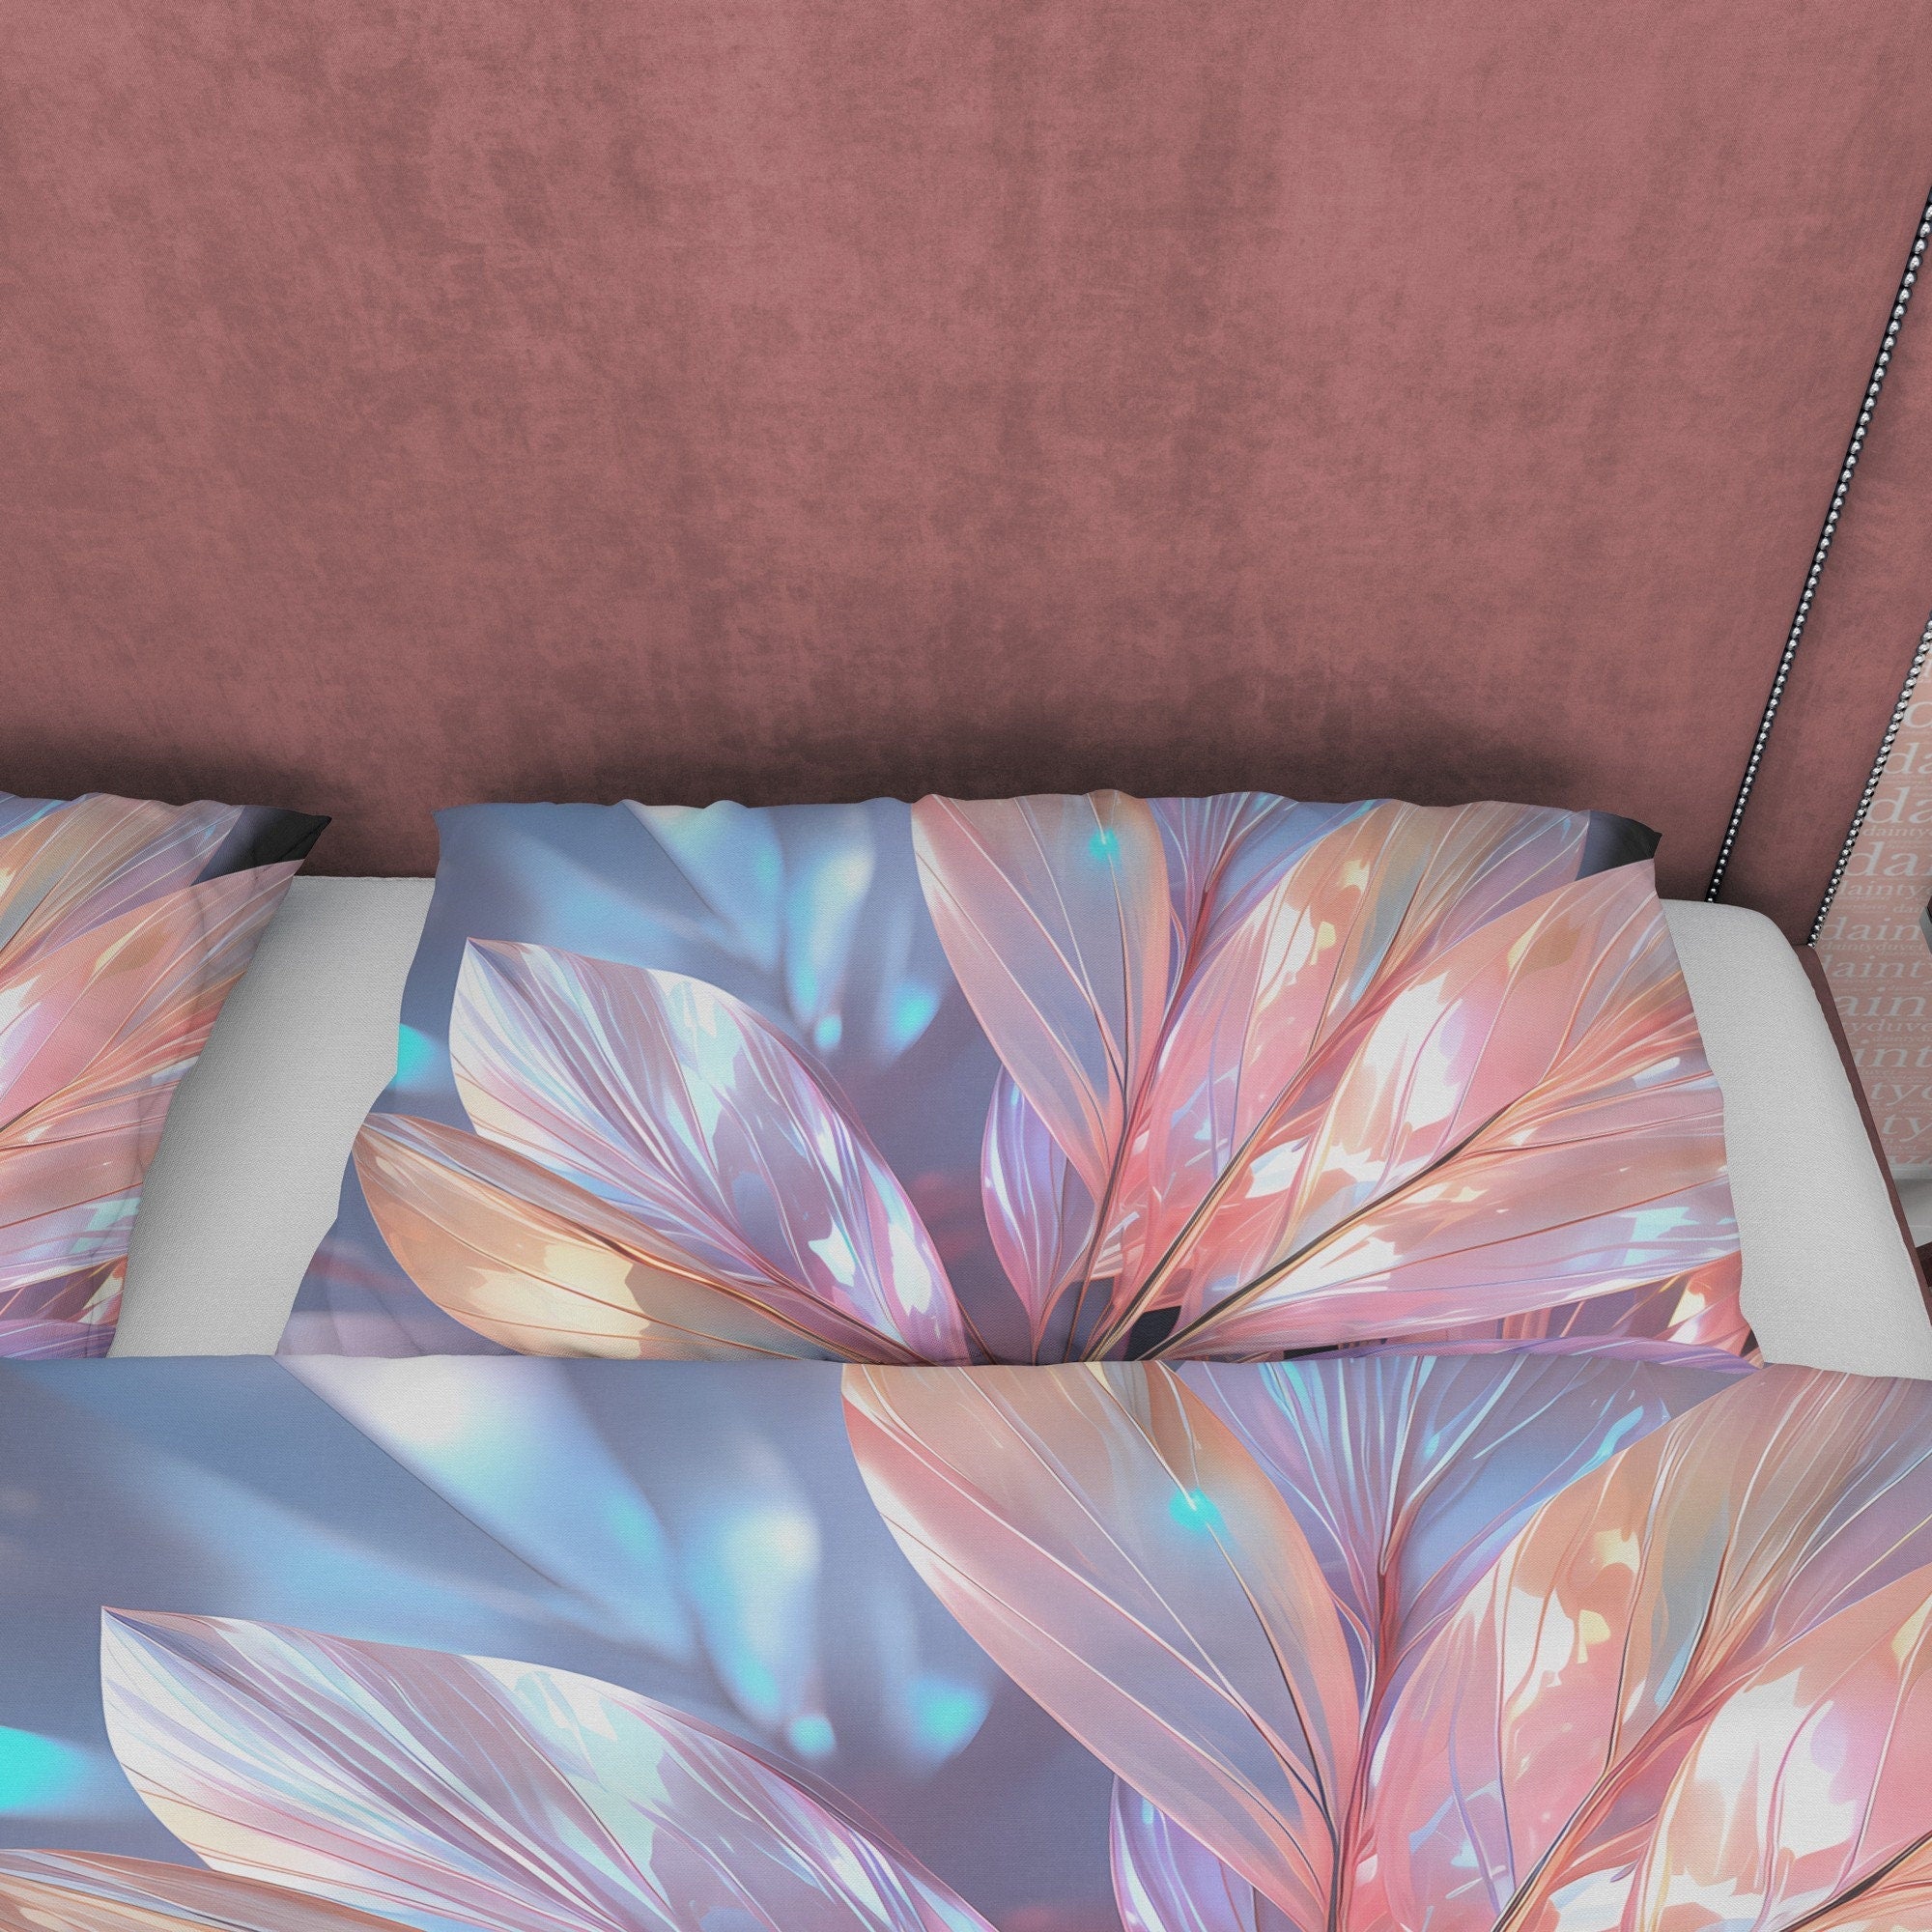 Glass Leaf Shiny Colorful Bedding Set Boho Duvet Cover, Holographic Plant Quilt Cover, Moonstone Inspired Bedspread, Galaxy Opal Bed Cover